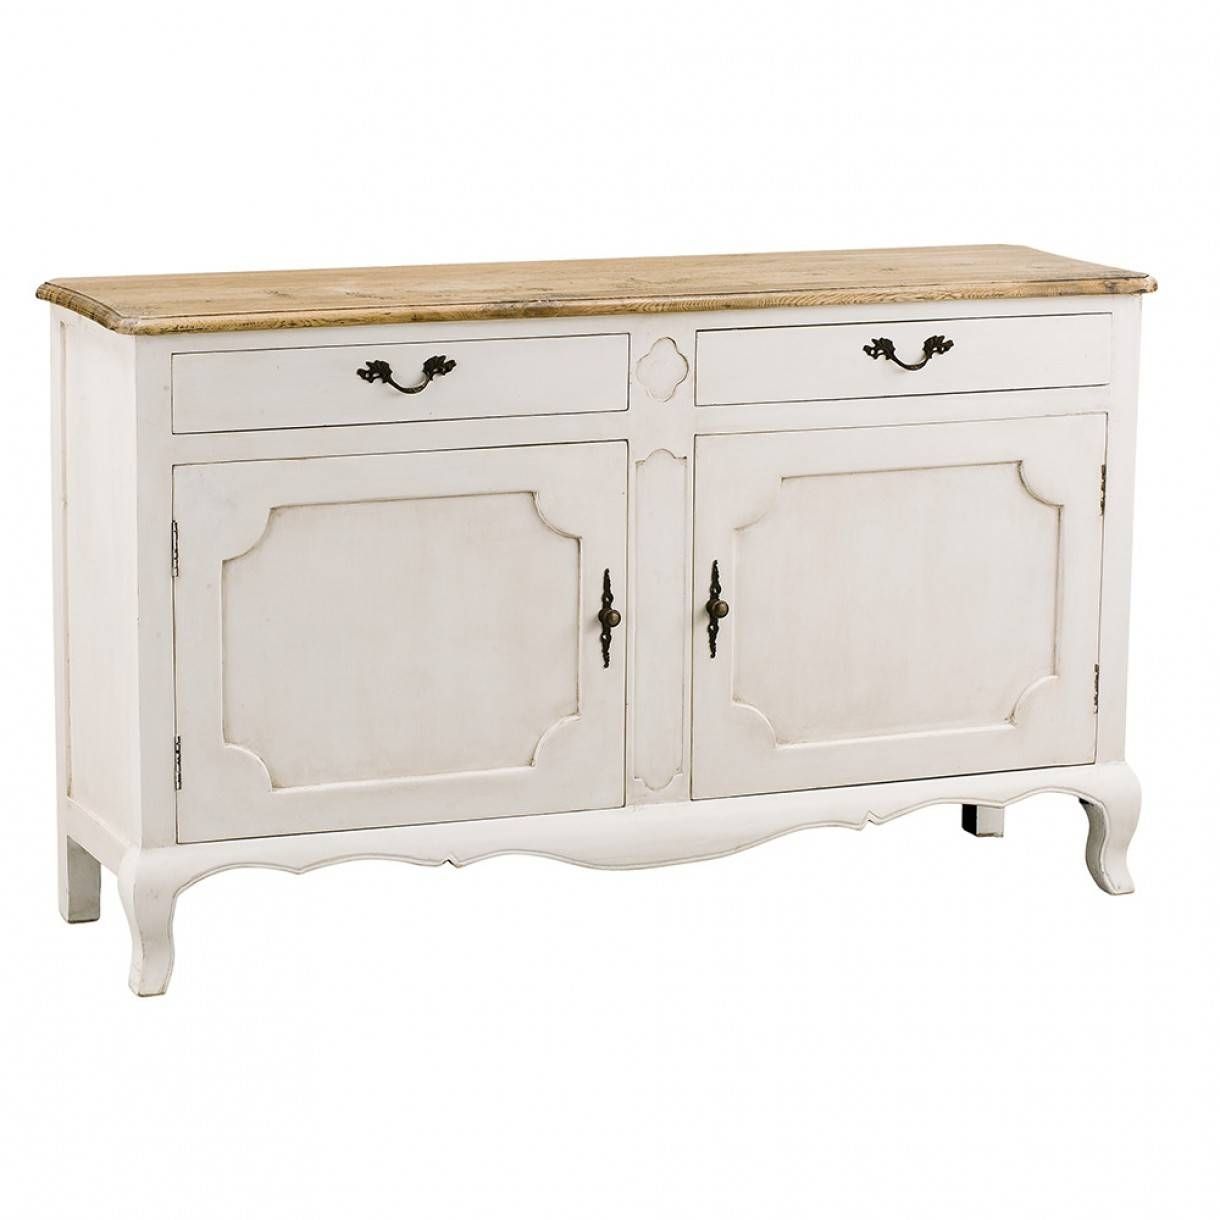 Sideboards: Marvellous White Sideboards Furniture Distressed White Intended For White Distressed Sideboard (View 4 of 20)